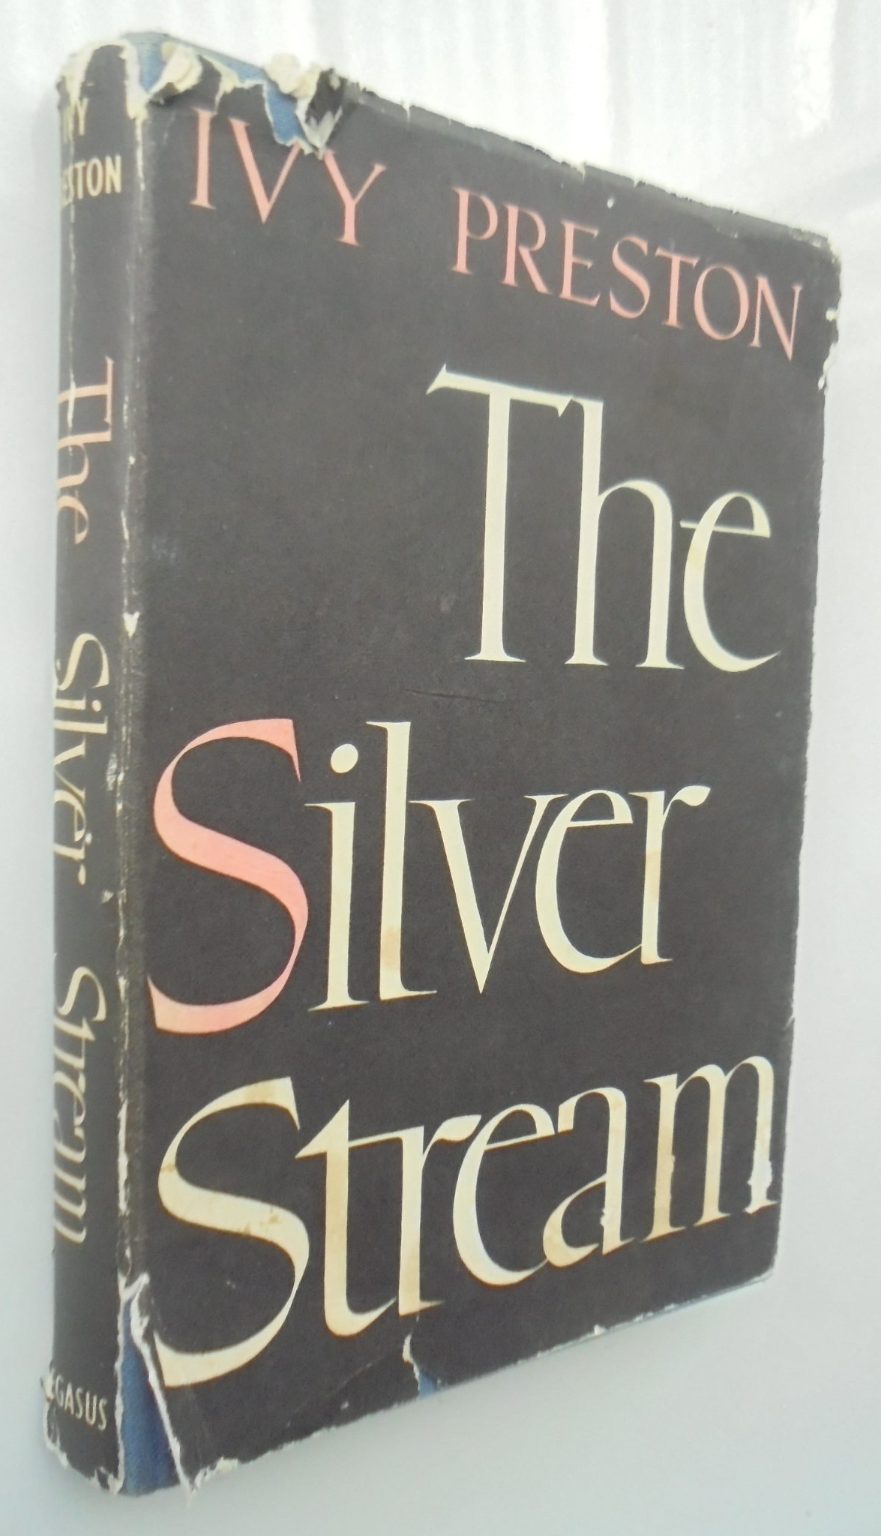 The Silver Stream. First Edition (1959) by Ivy Preston